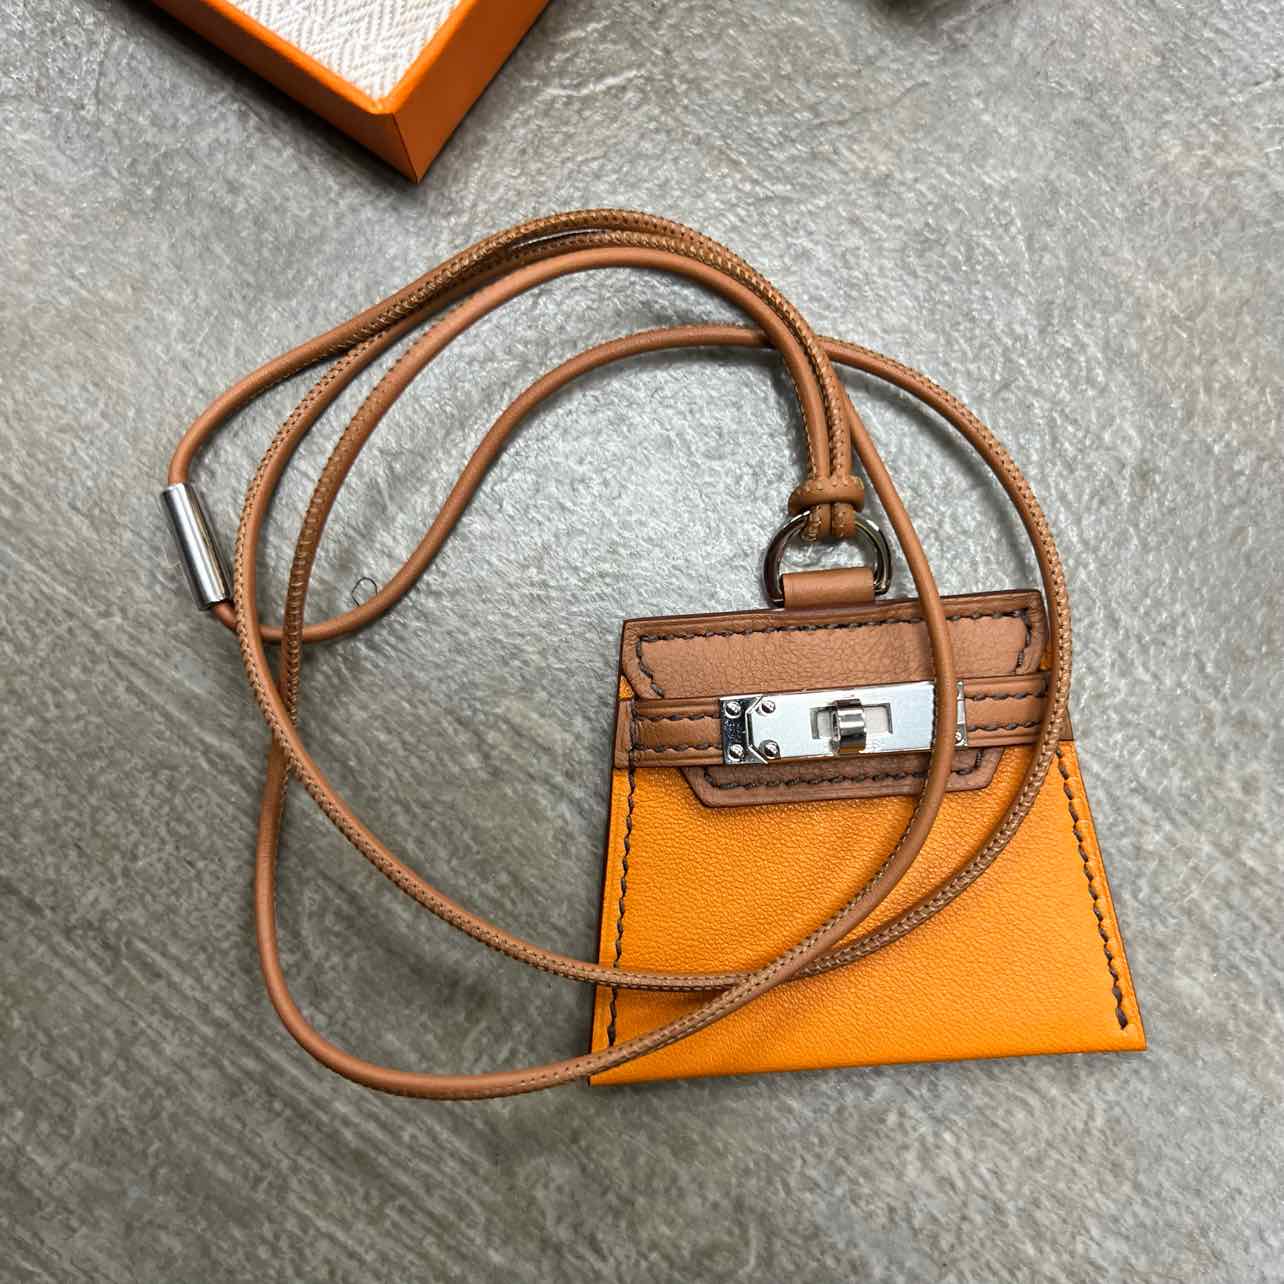 Hermes Lanyard "LEATHER" New Brown